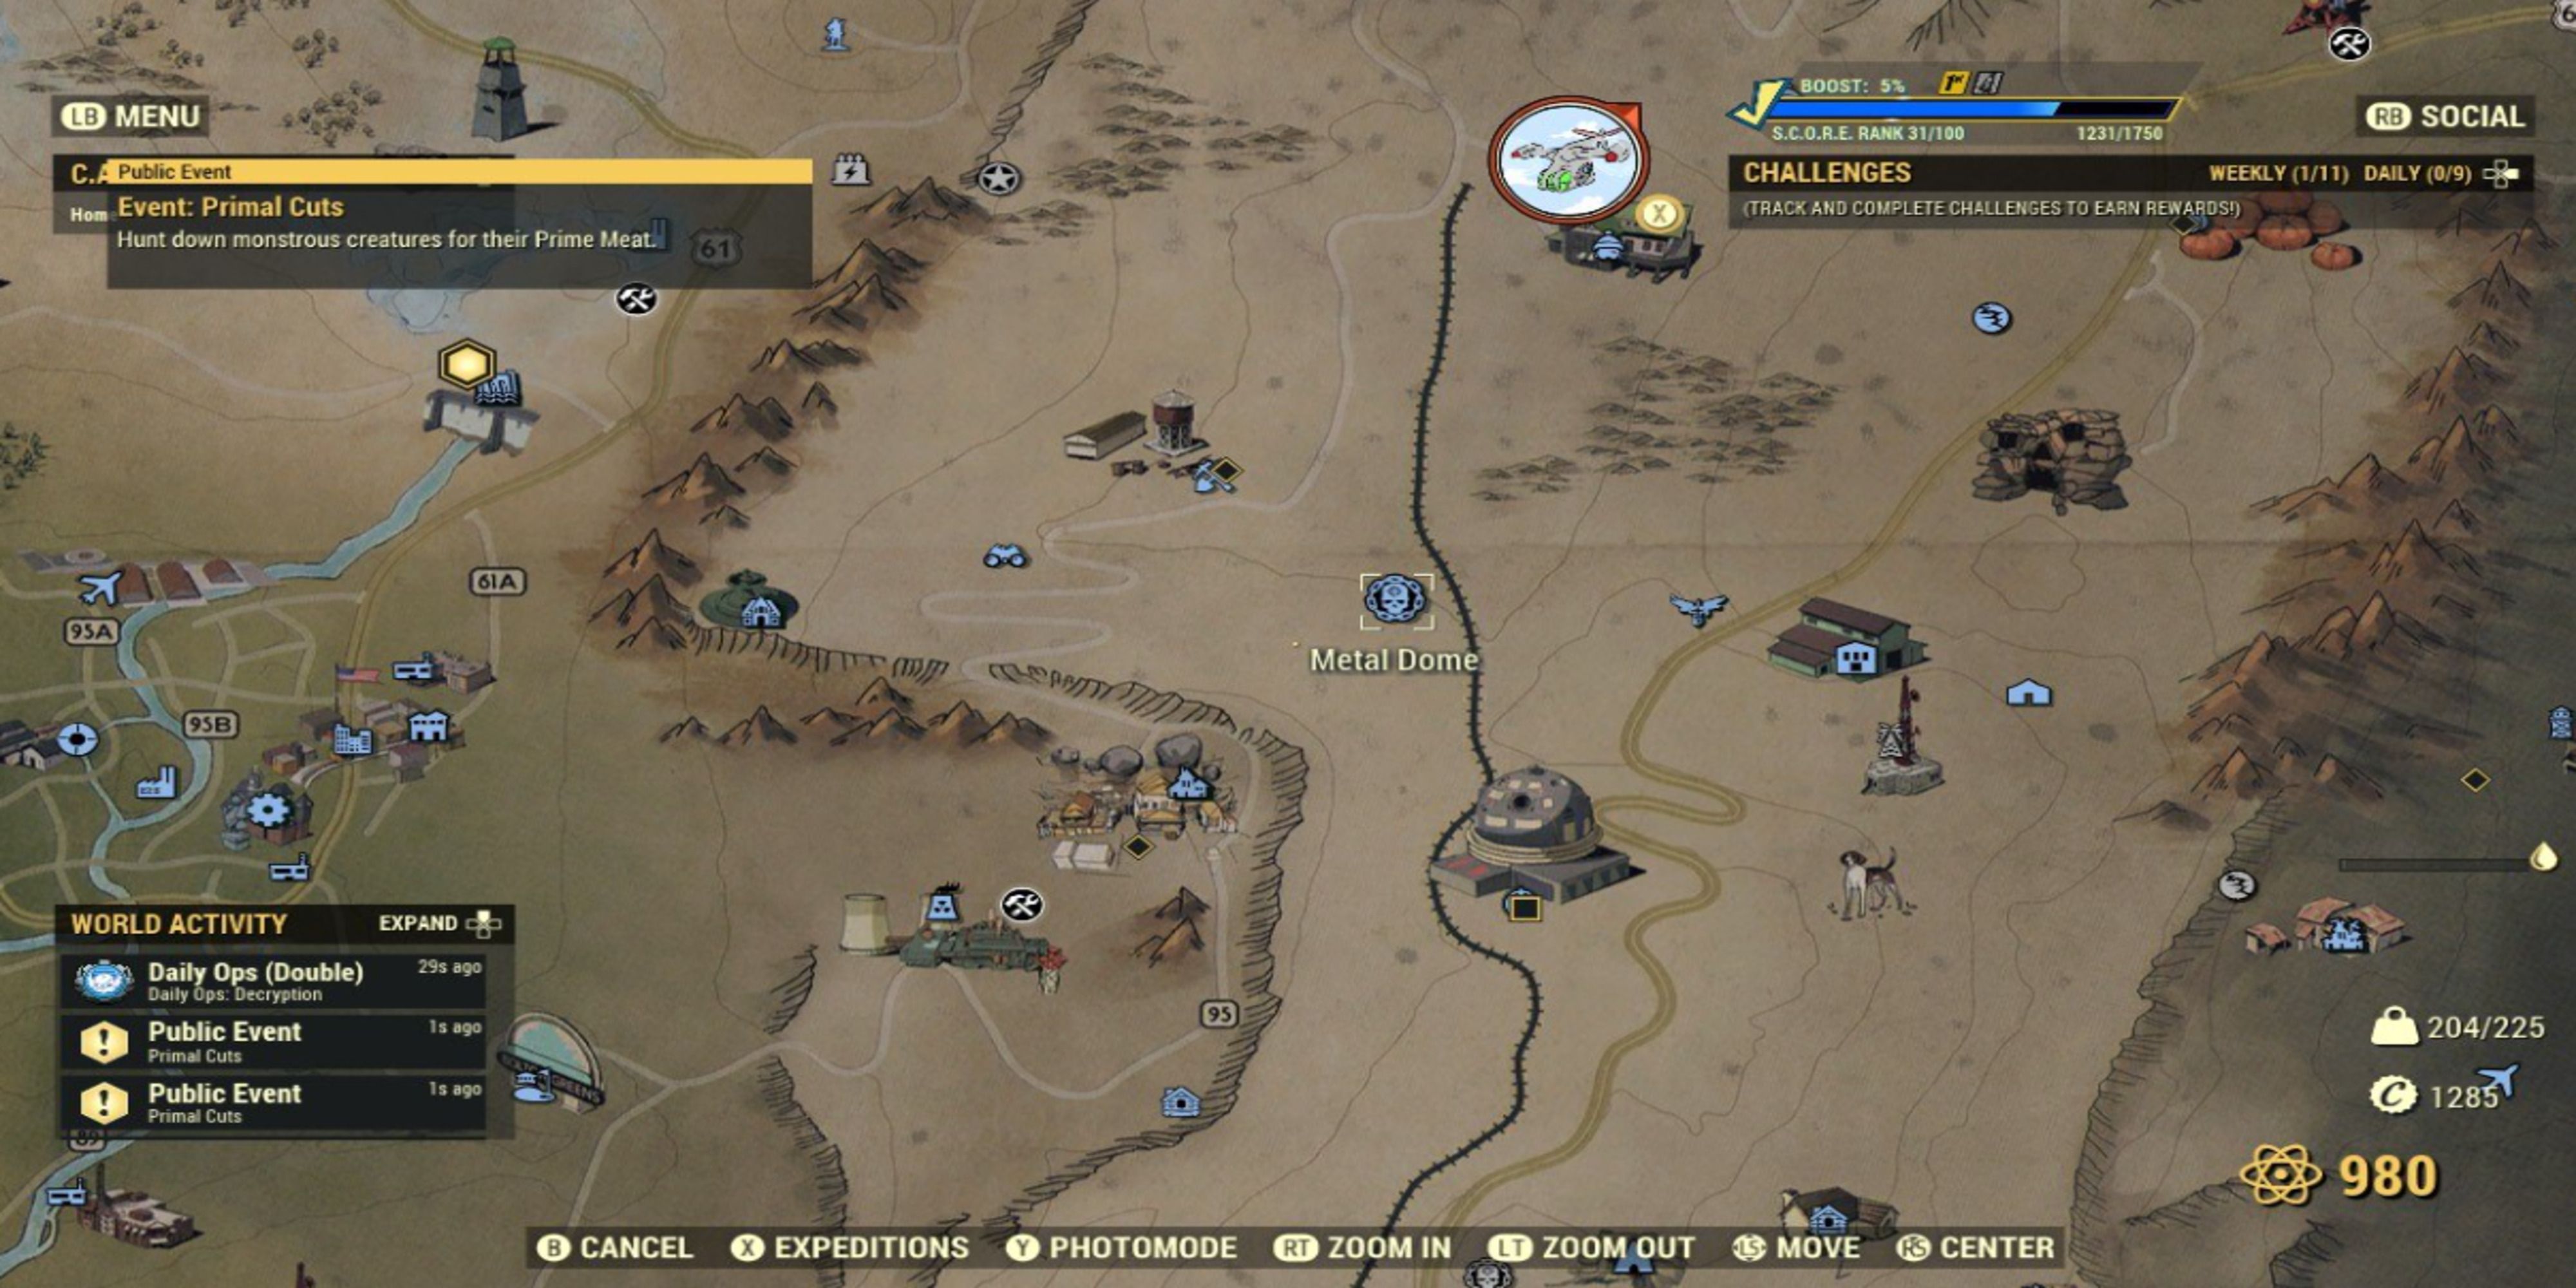 The Metal Dome location marked on the map in Fallout 76